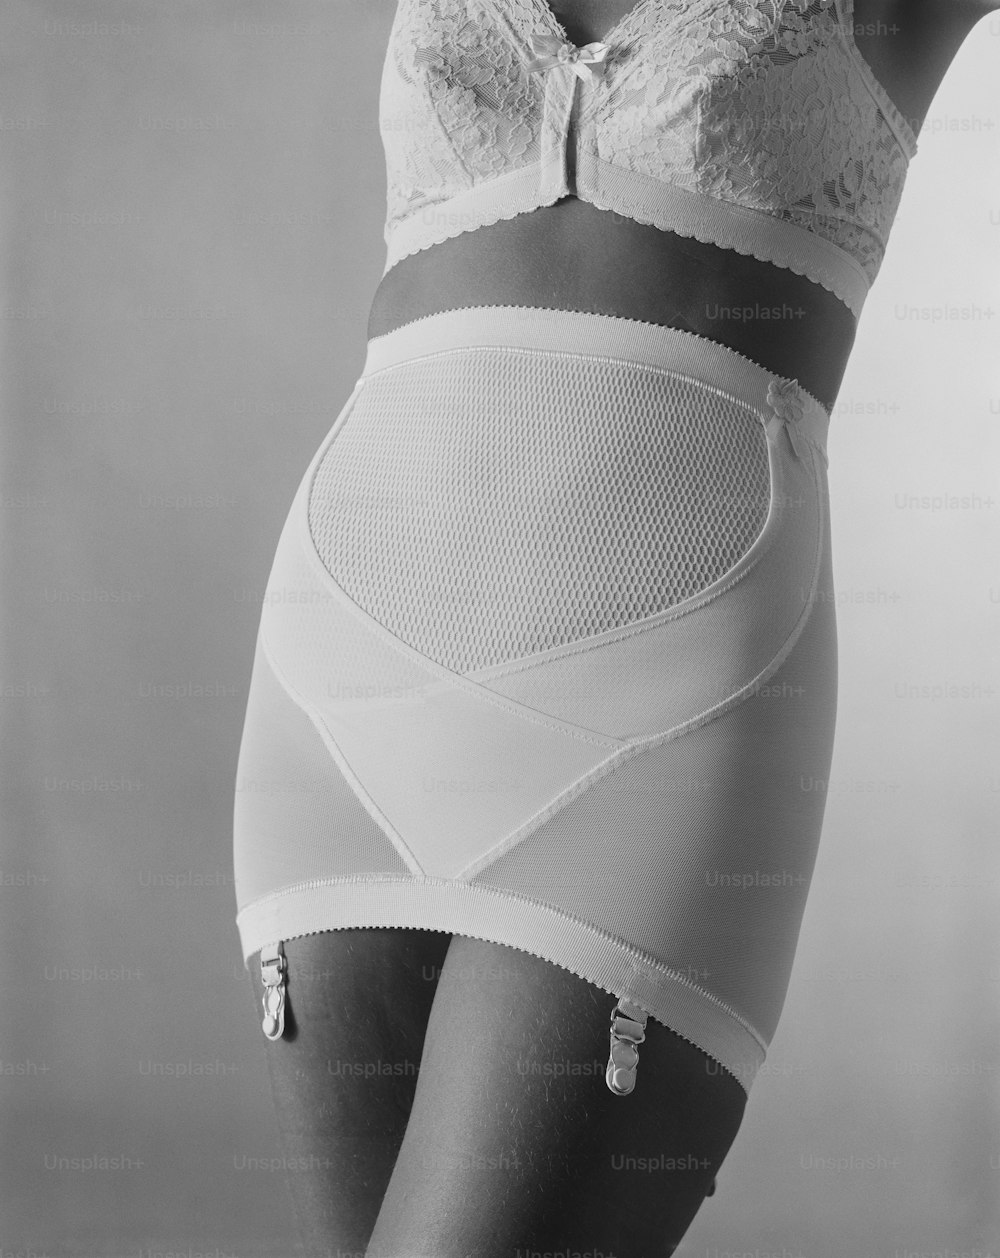 a woman wearing a bra and panties in a black and white photo